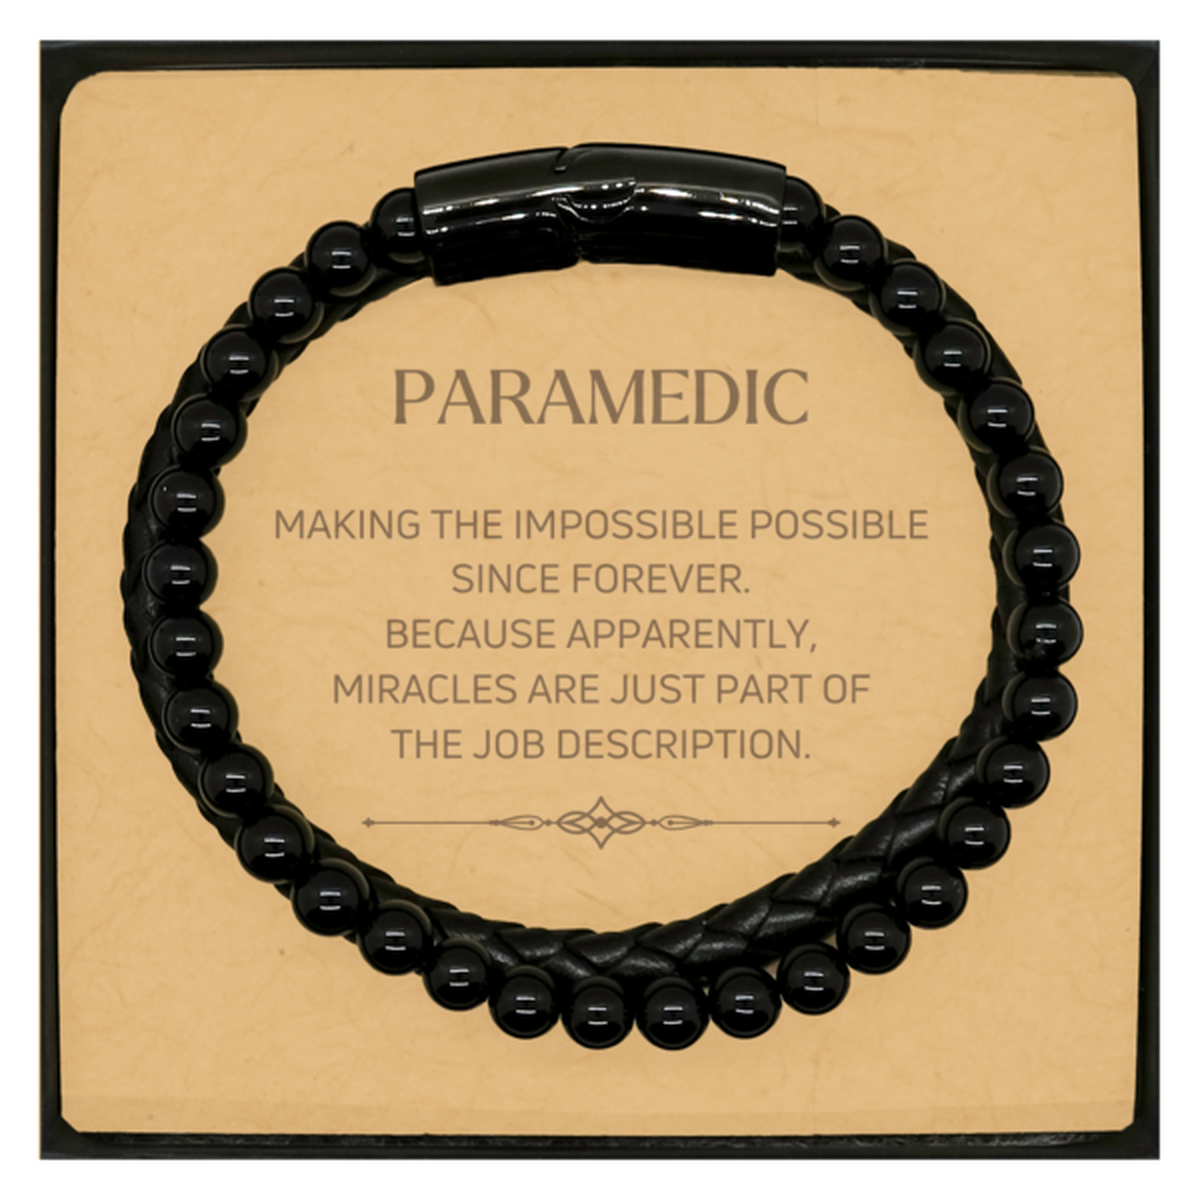 Funny Paramedic Gifts, Miracles are just part of the job description, Inspirational Birthday Christmas Stone Leather Bracelets For Paramedic, Men, Women, Coworkers, Friends, Boss